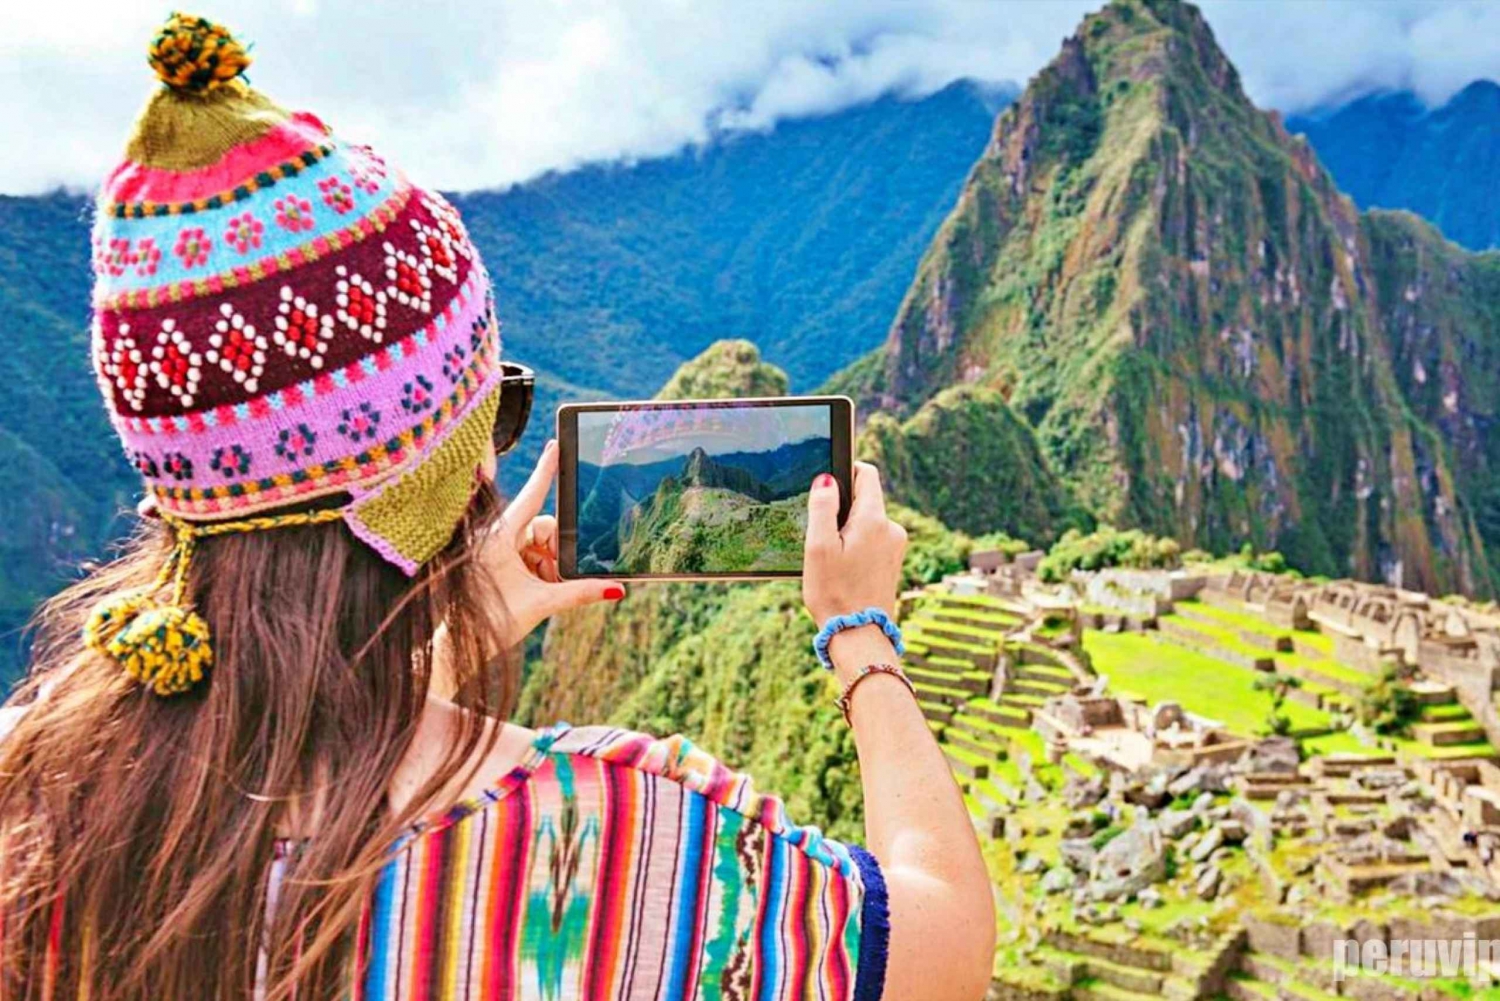 Discover Machu Picchu: Guided Group Tour Historic Site